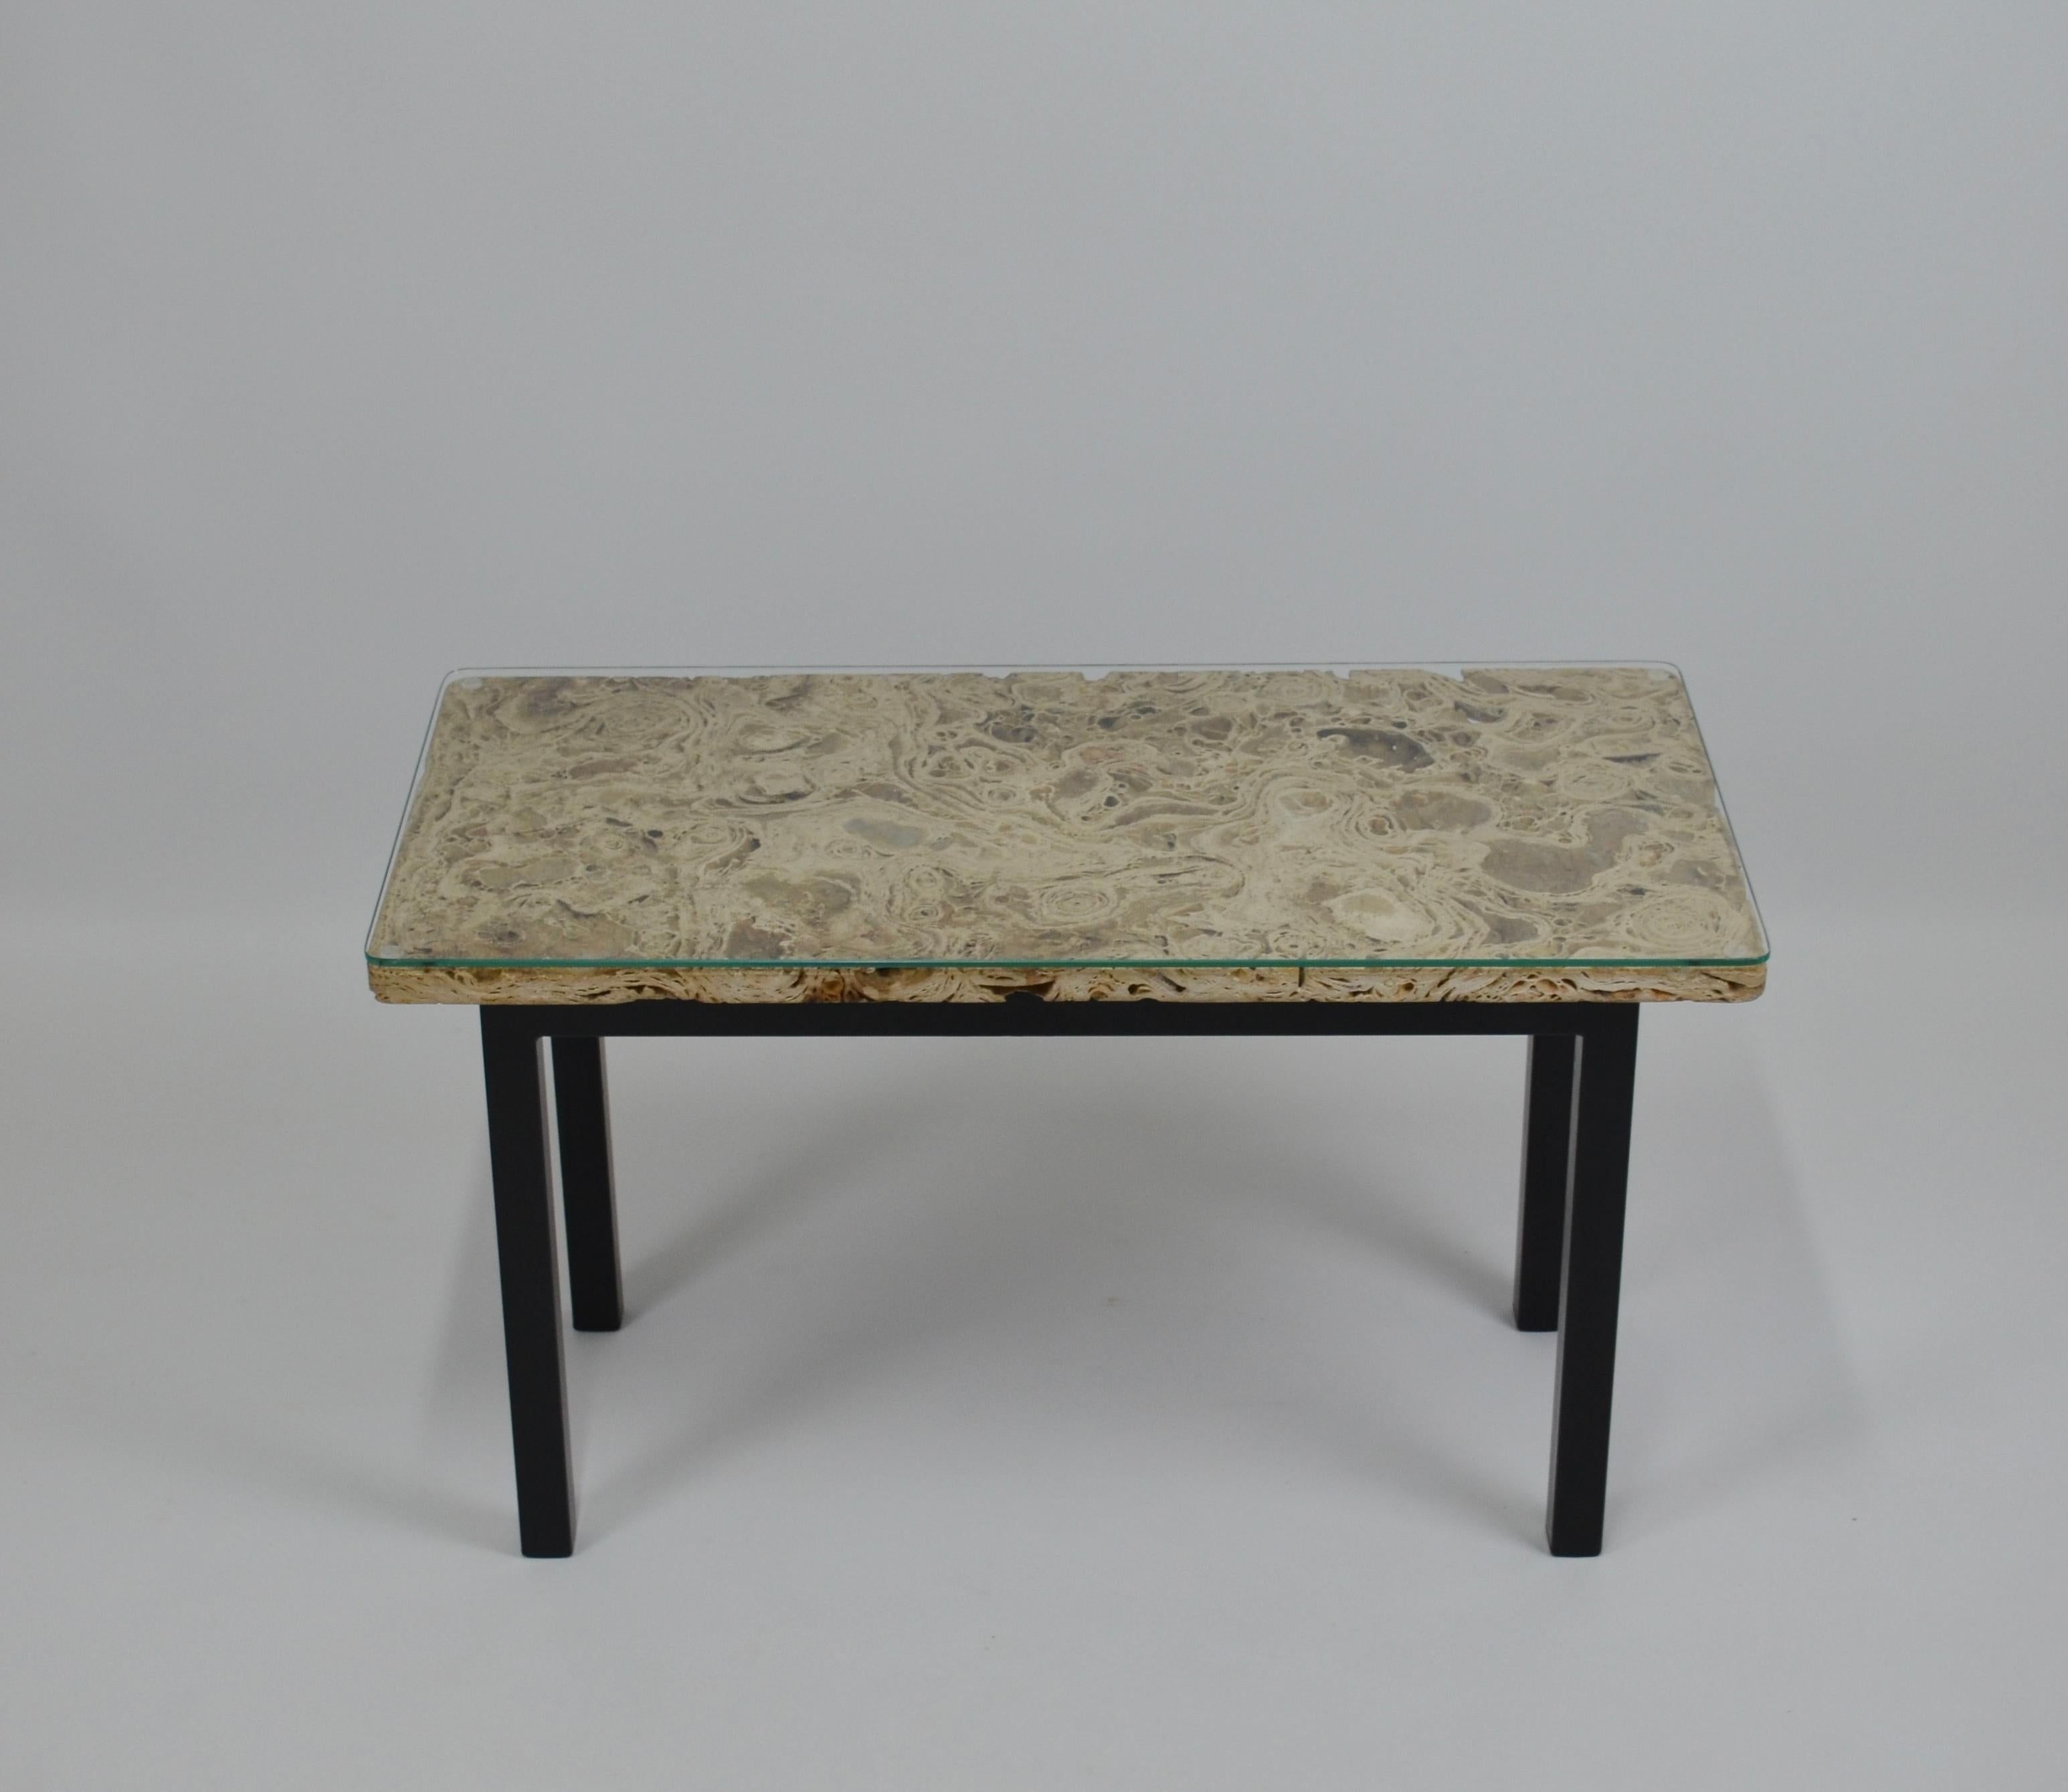 Magnificent coffee table with travertine top mounted on a black painted metal structure.
A glass top, 0.5 cm (0.2 in) thick, cut to measure and beveled, makes it easier to use while protecting this splendid stone. The travertine block is 2 cm (0.8